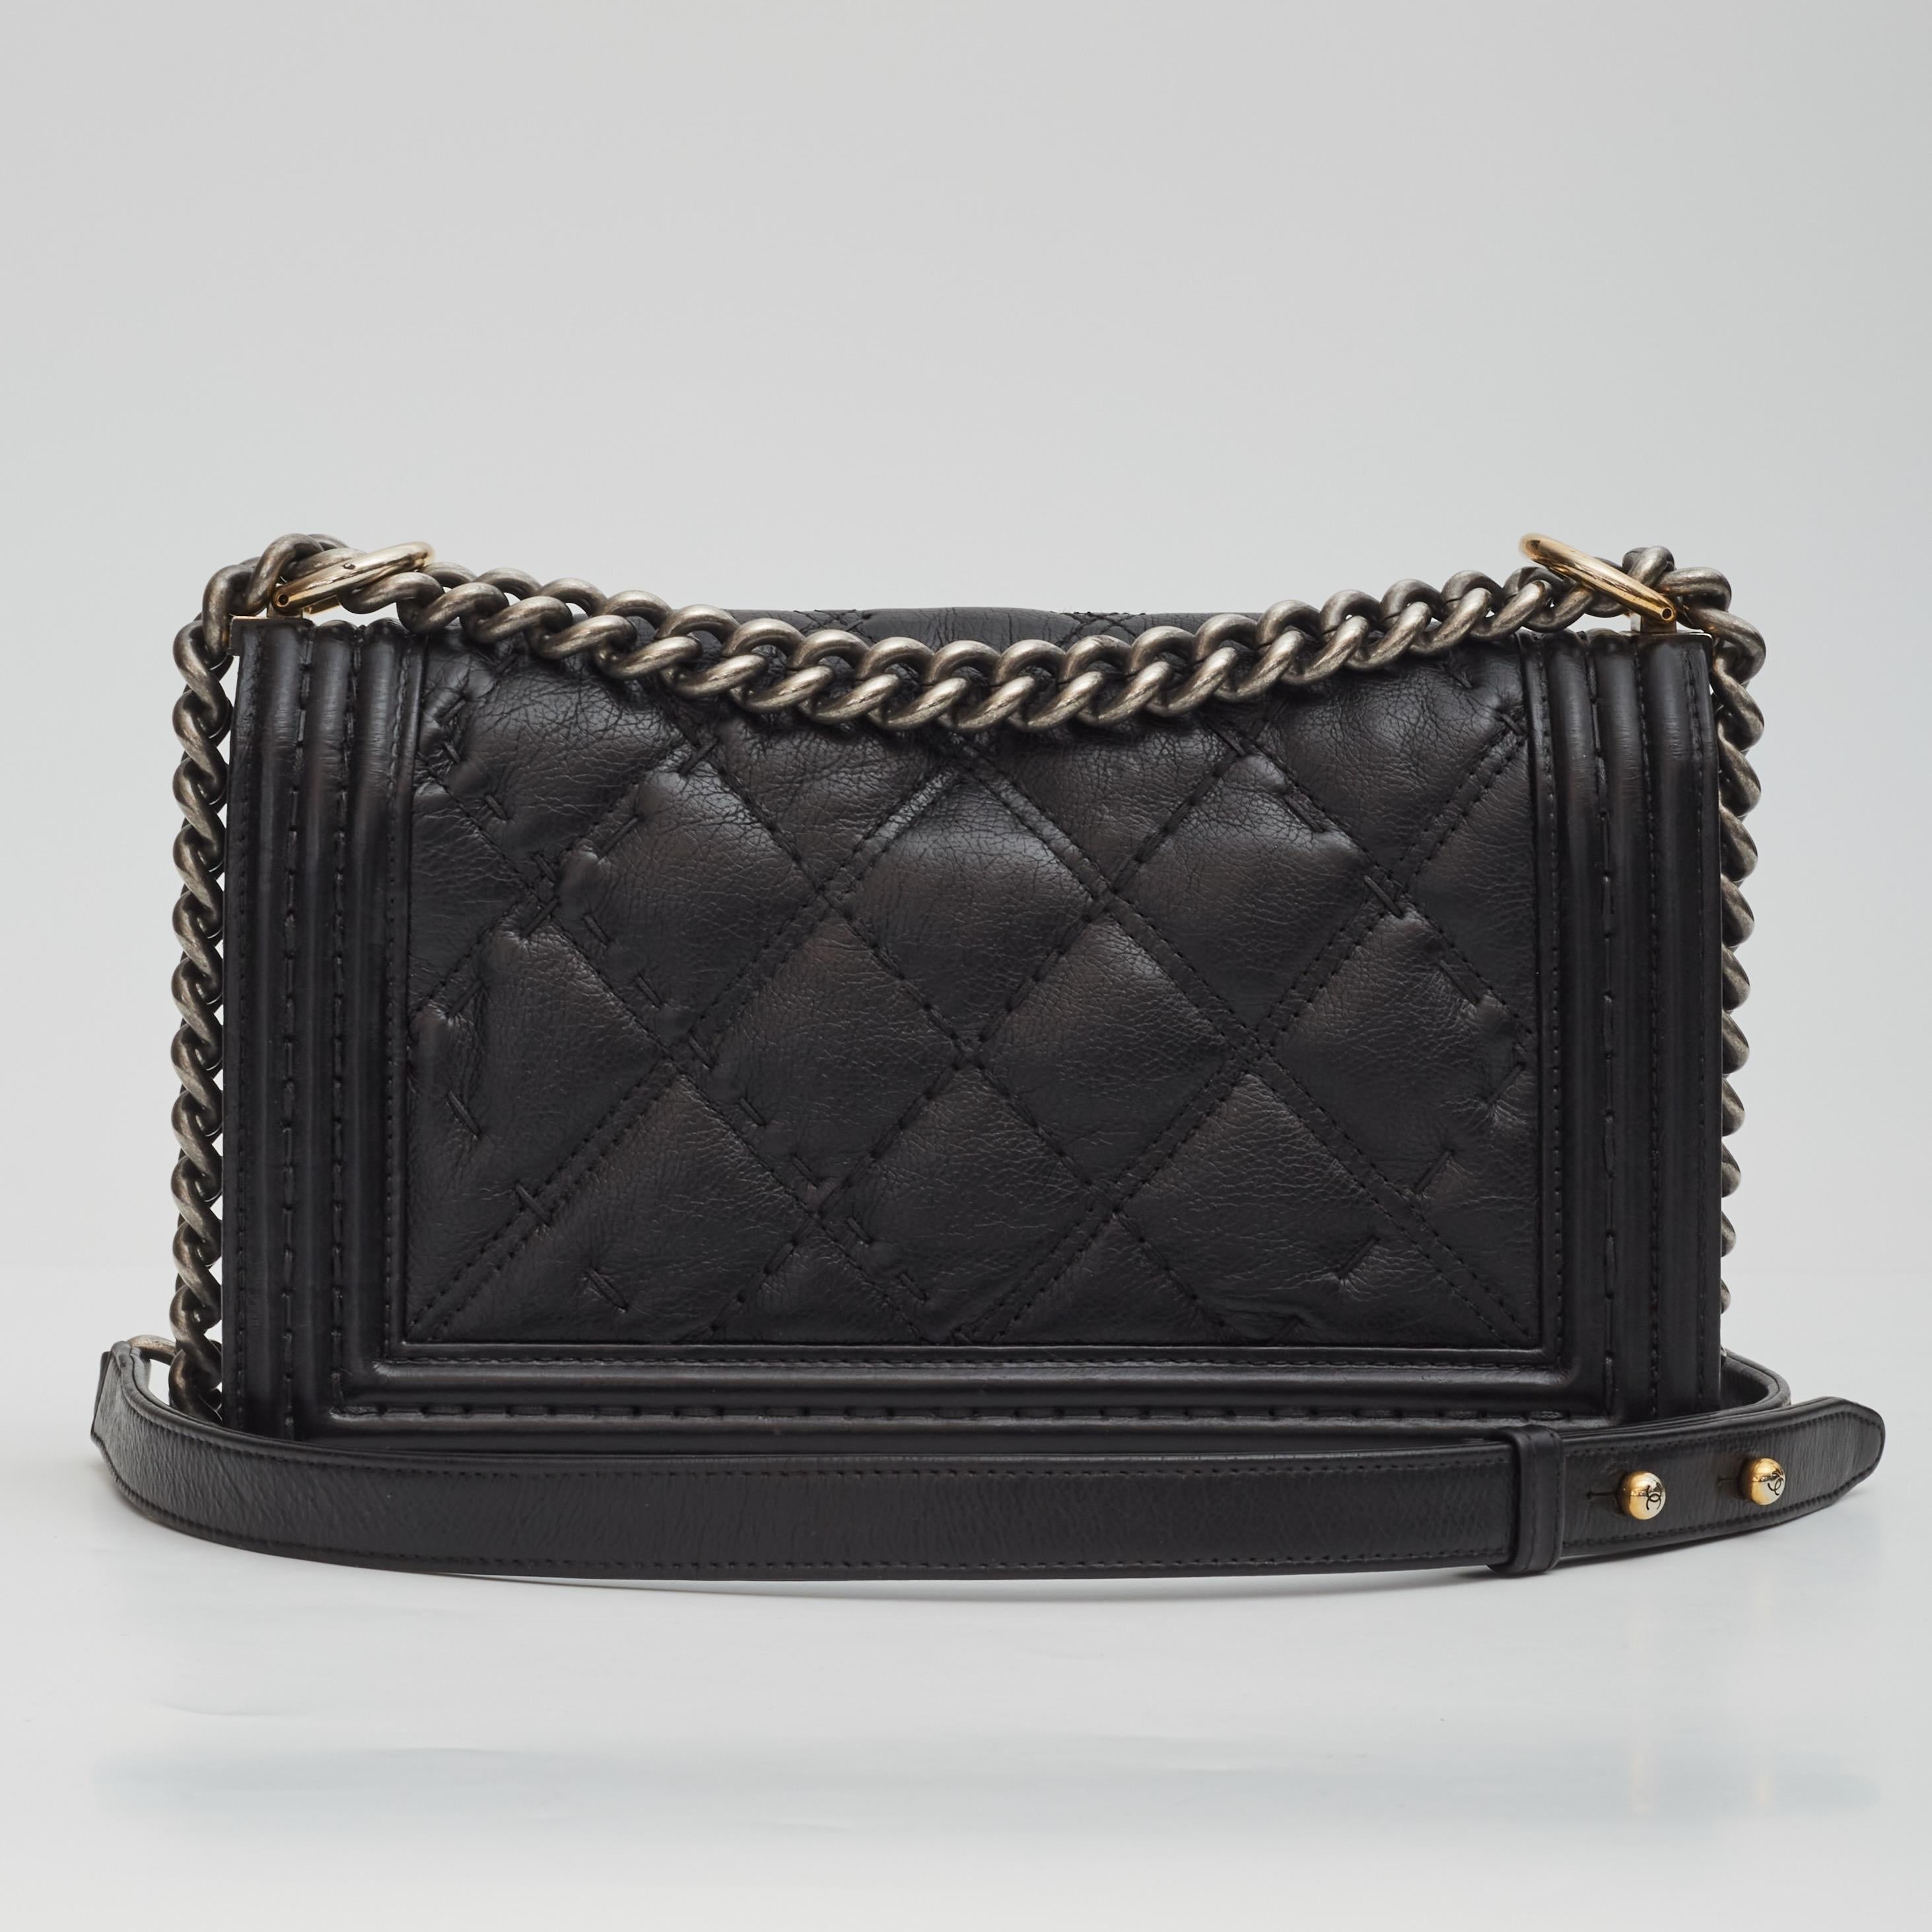 This Chanel crossbody bag is made of calfskin leather with a double diamond stitch and a peripheral framed quilting. The bag features ruthenium adjustable chain link shoulder straps, a shoulder pad, a front flap with ruthenium Boy CC push lock